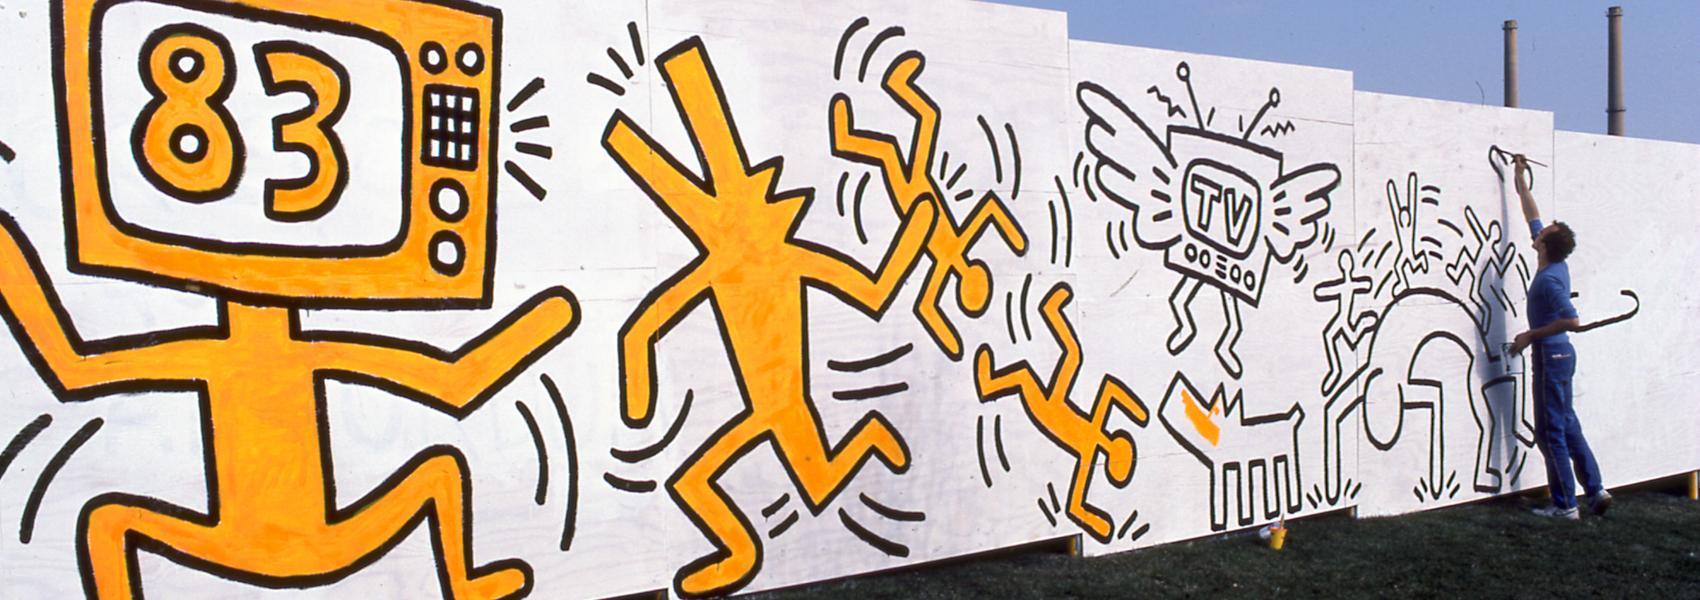 "Construction Fence" by Keith Haring, 1983, mixed reality experience